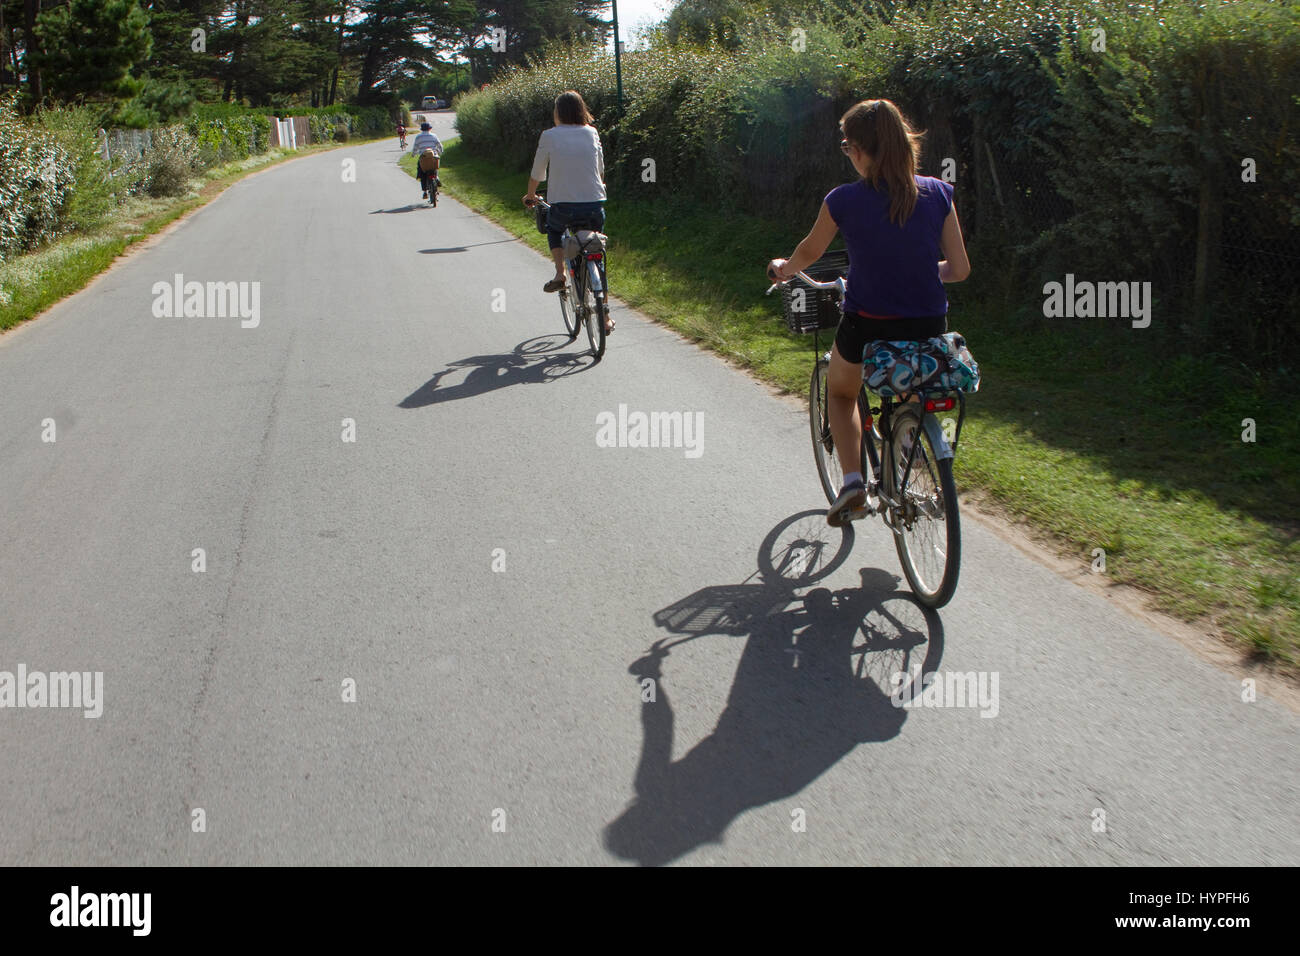 France, North-Western France, Ile d'Yeu, bicycle ride on a road from Port-Joinville Stock Photo